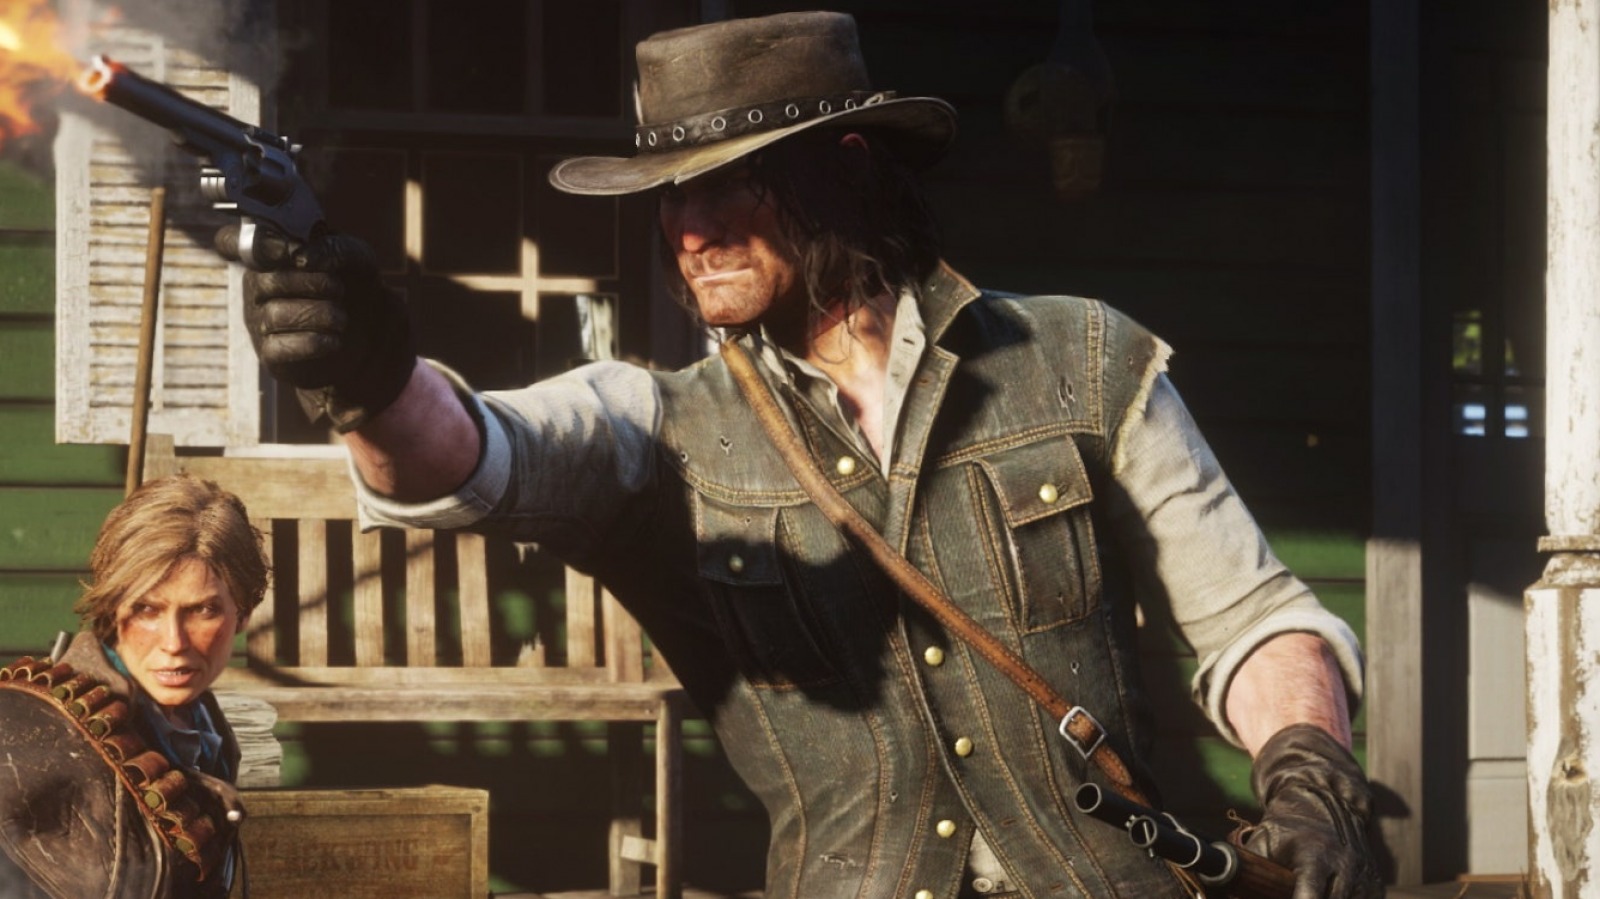 Making games like Red Dead Redemption 2 shouldn't be such hard